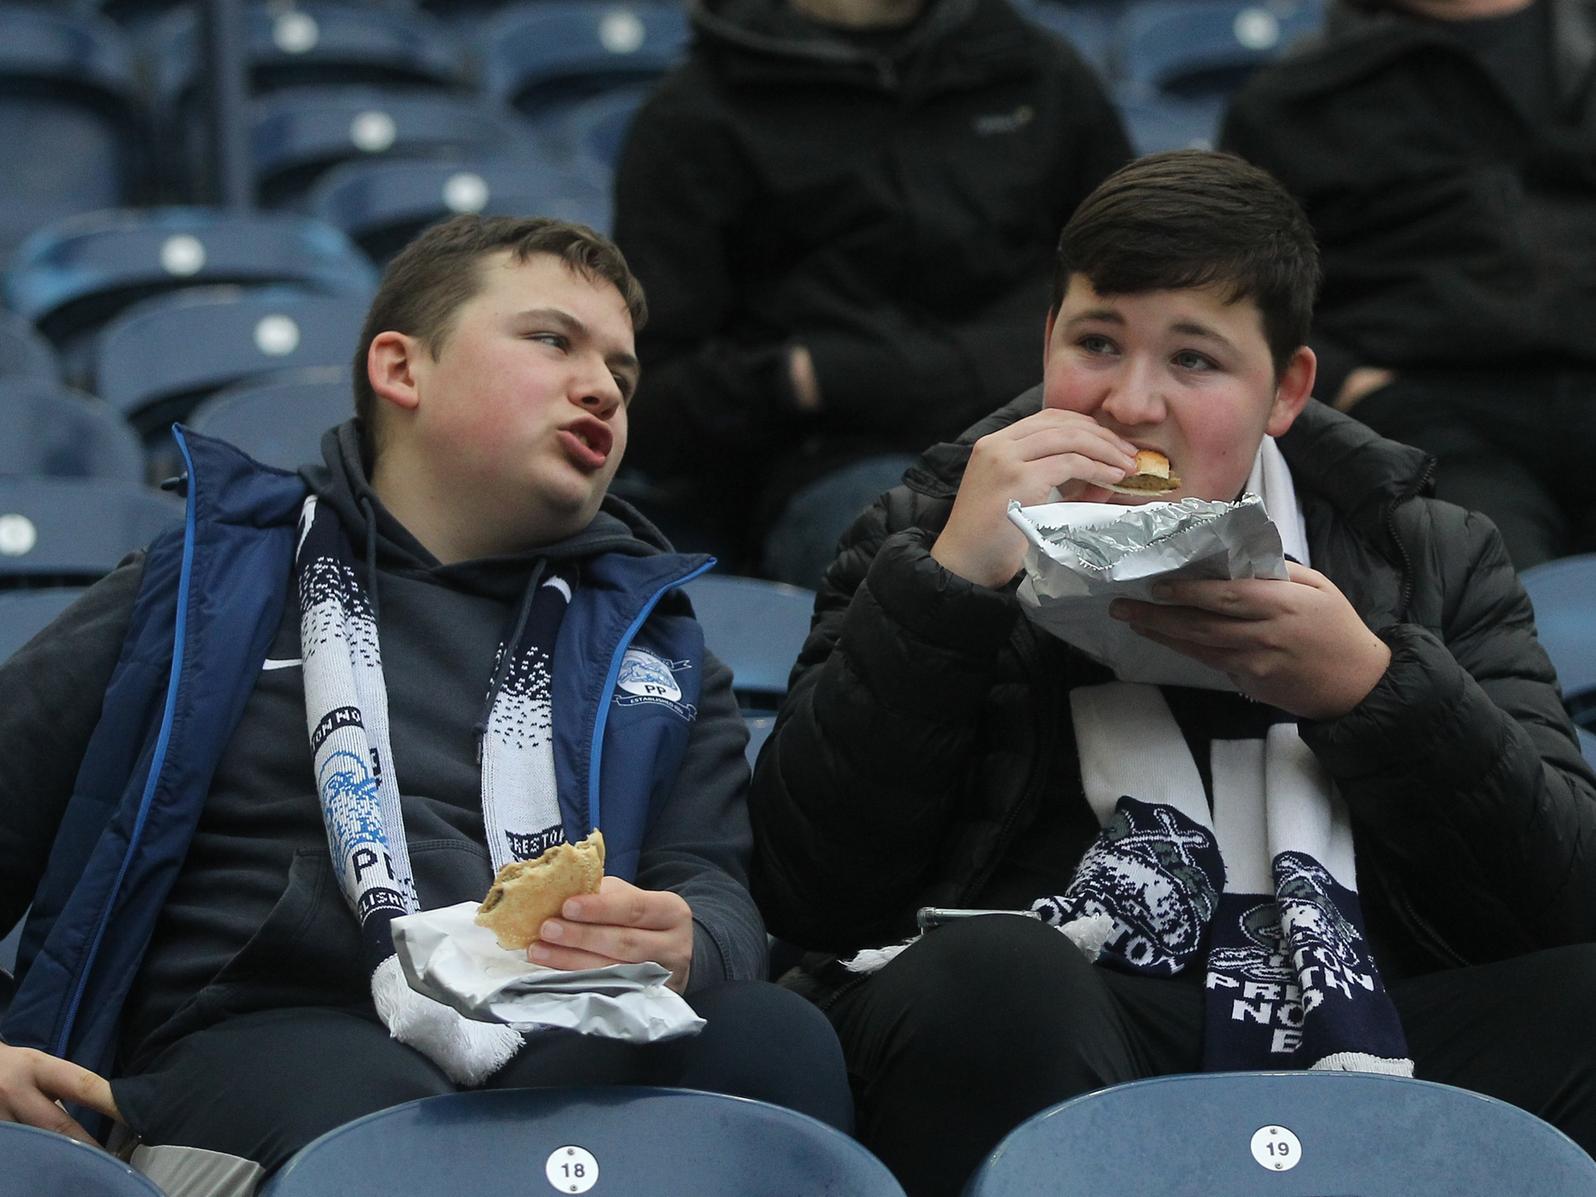 Football food is always important, as these two PNE fans shows before kick off.